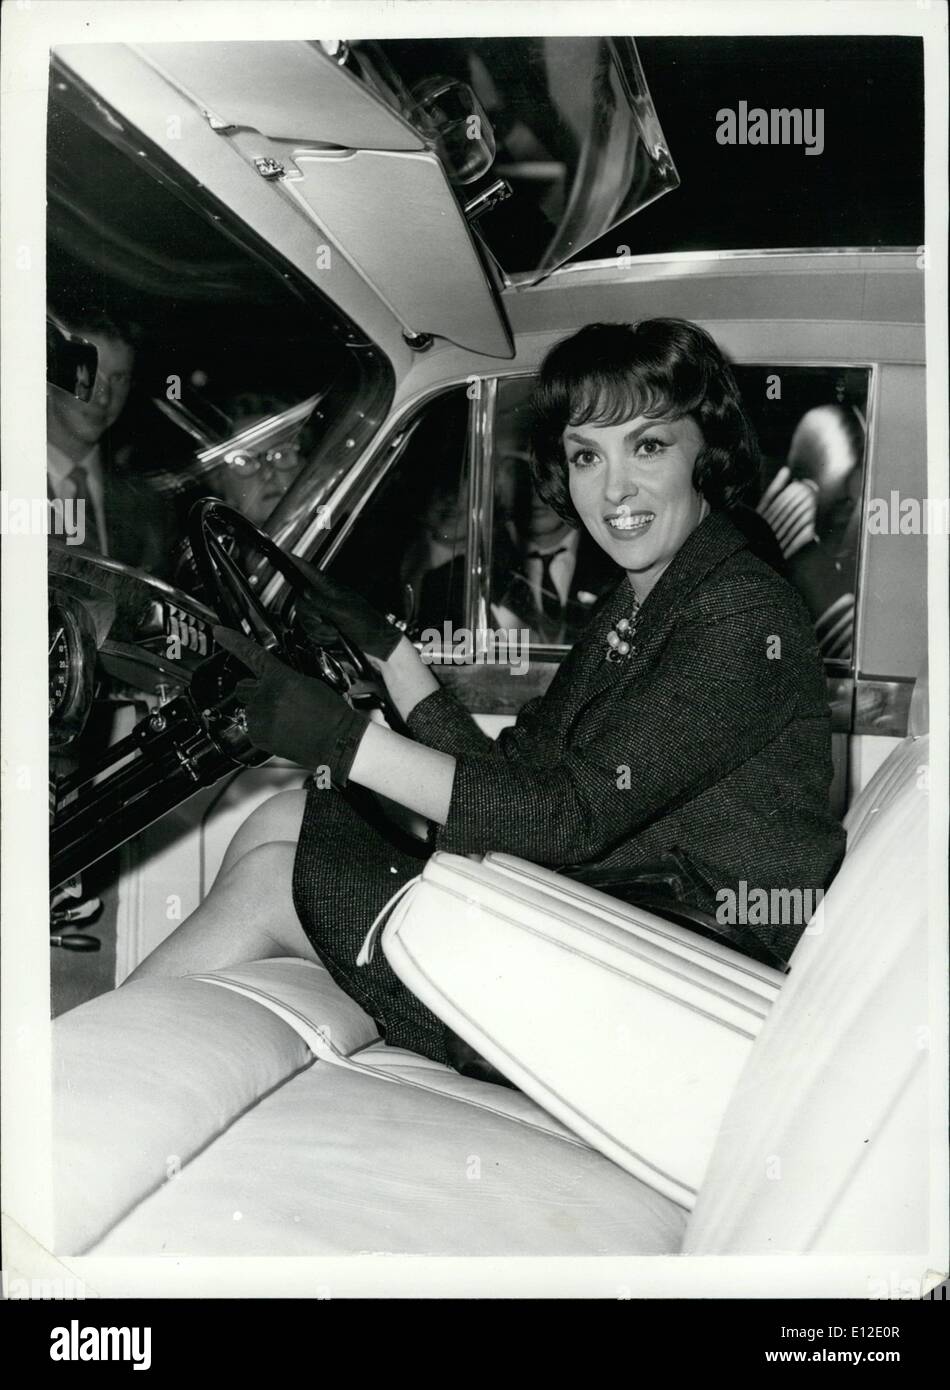 Dec. 15, 2011 - Gina Lollobrigida Visits The Motor Show Choose A Rolls: Italian film star Gina Lollobrigida today visited the motor Shows at Earl's Court../.. on the Peter Radford Stand - show saw a replica of the ,000 Rolls Races 'Silver Cloud' which is being presented to her by United Artists for her performance in her film ''Soloman and Sheba''. Photo Shows Gina Lollobrigida seated in the Rolls Royce at the show this afternoon. The film has its premiere tomorrow/ Stock Photo